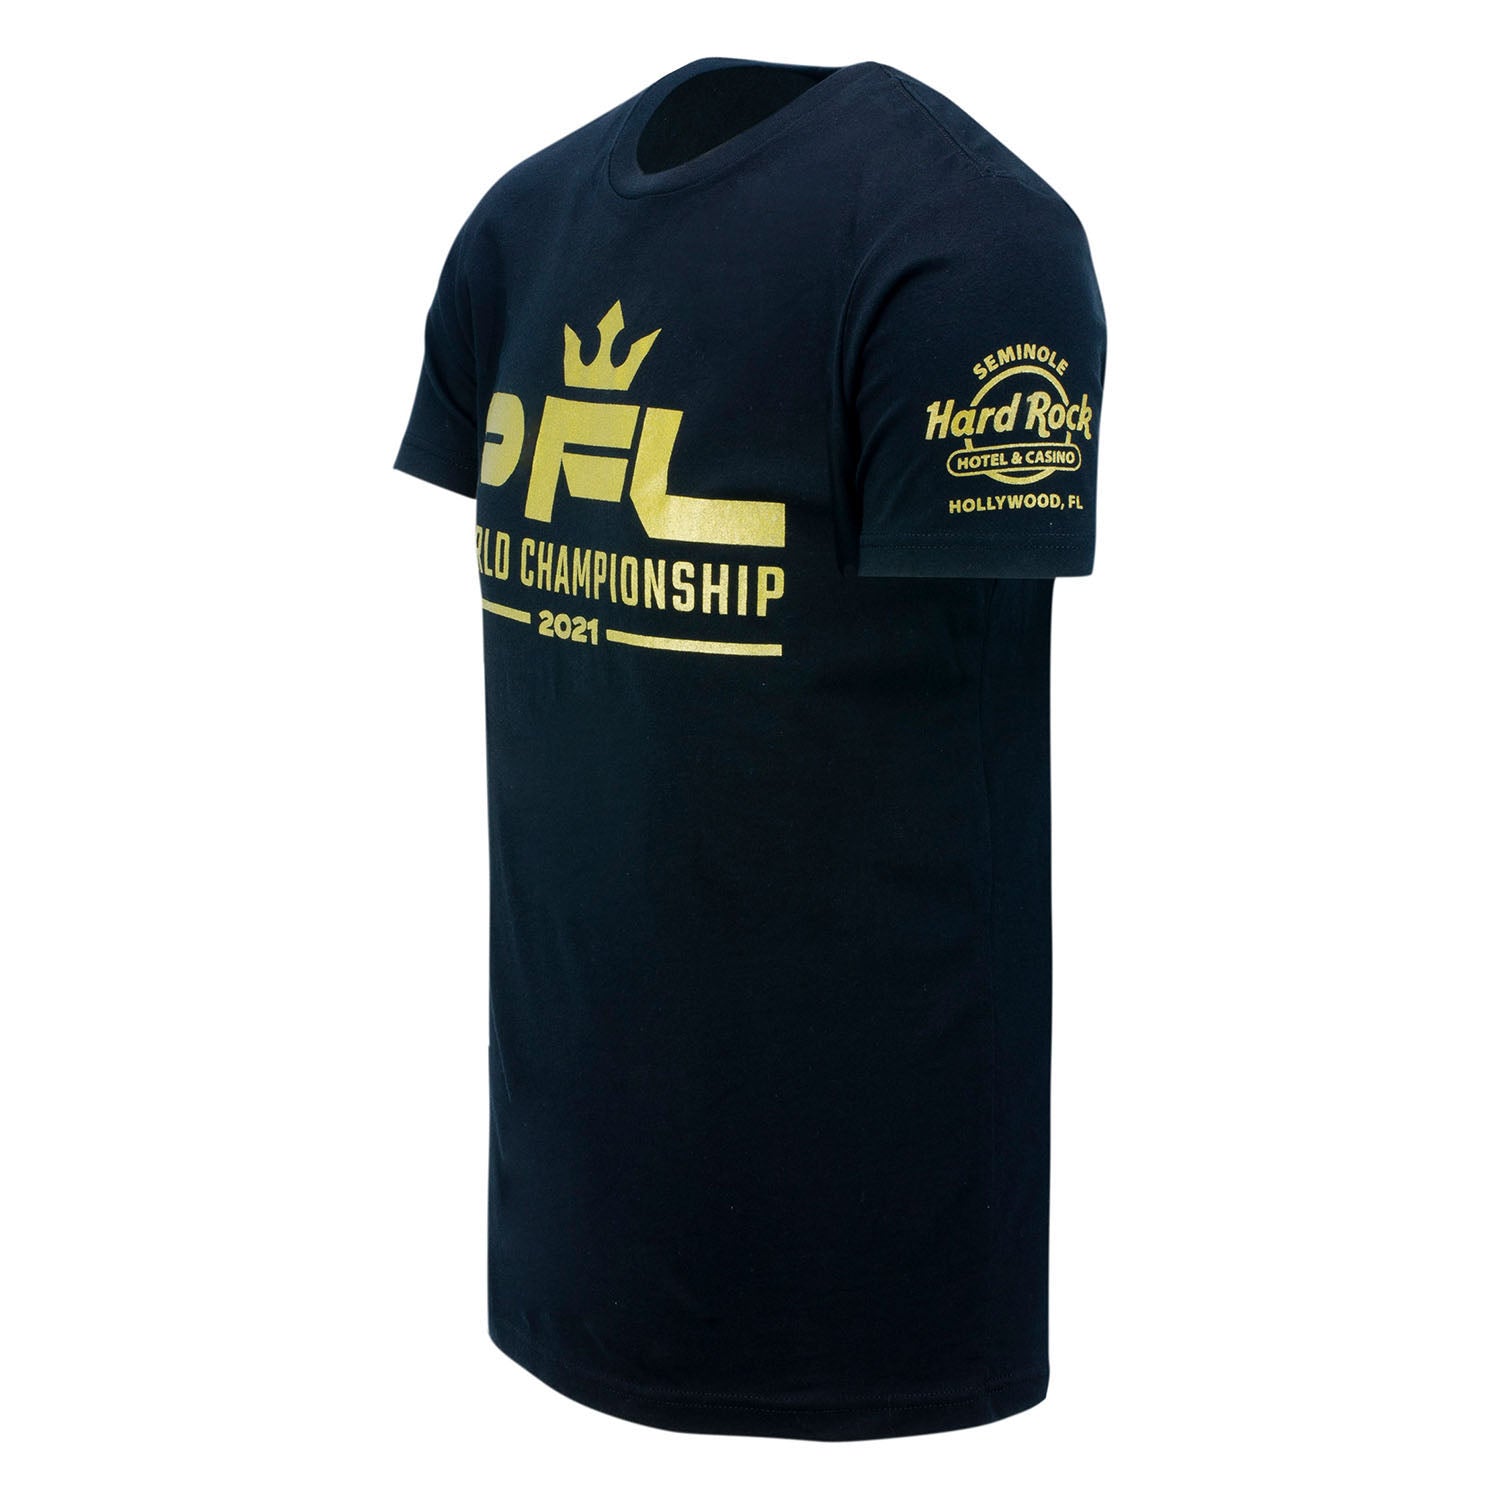 2021 Championship Red Corner Shirt in Black - Front View